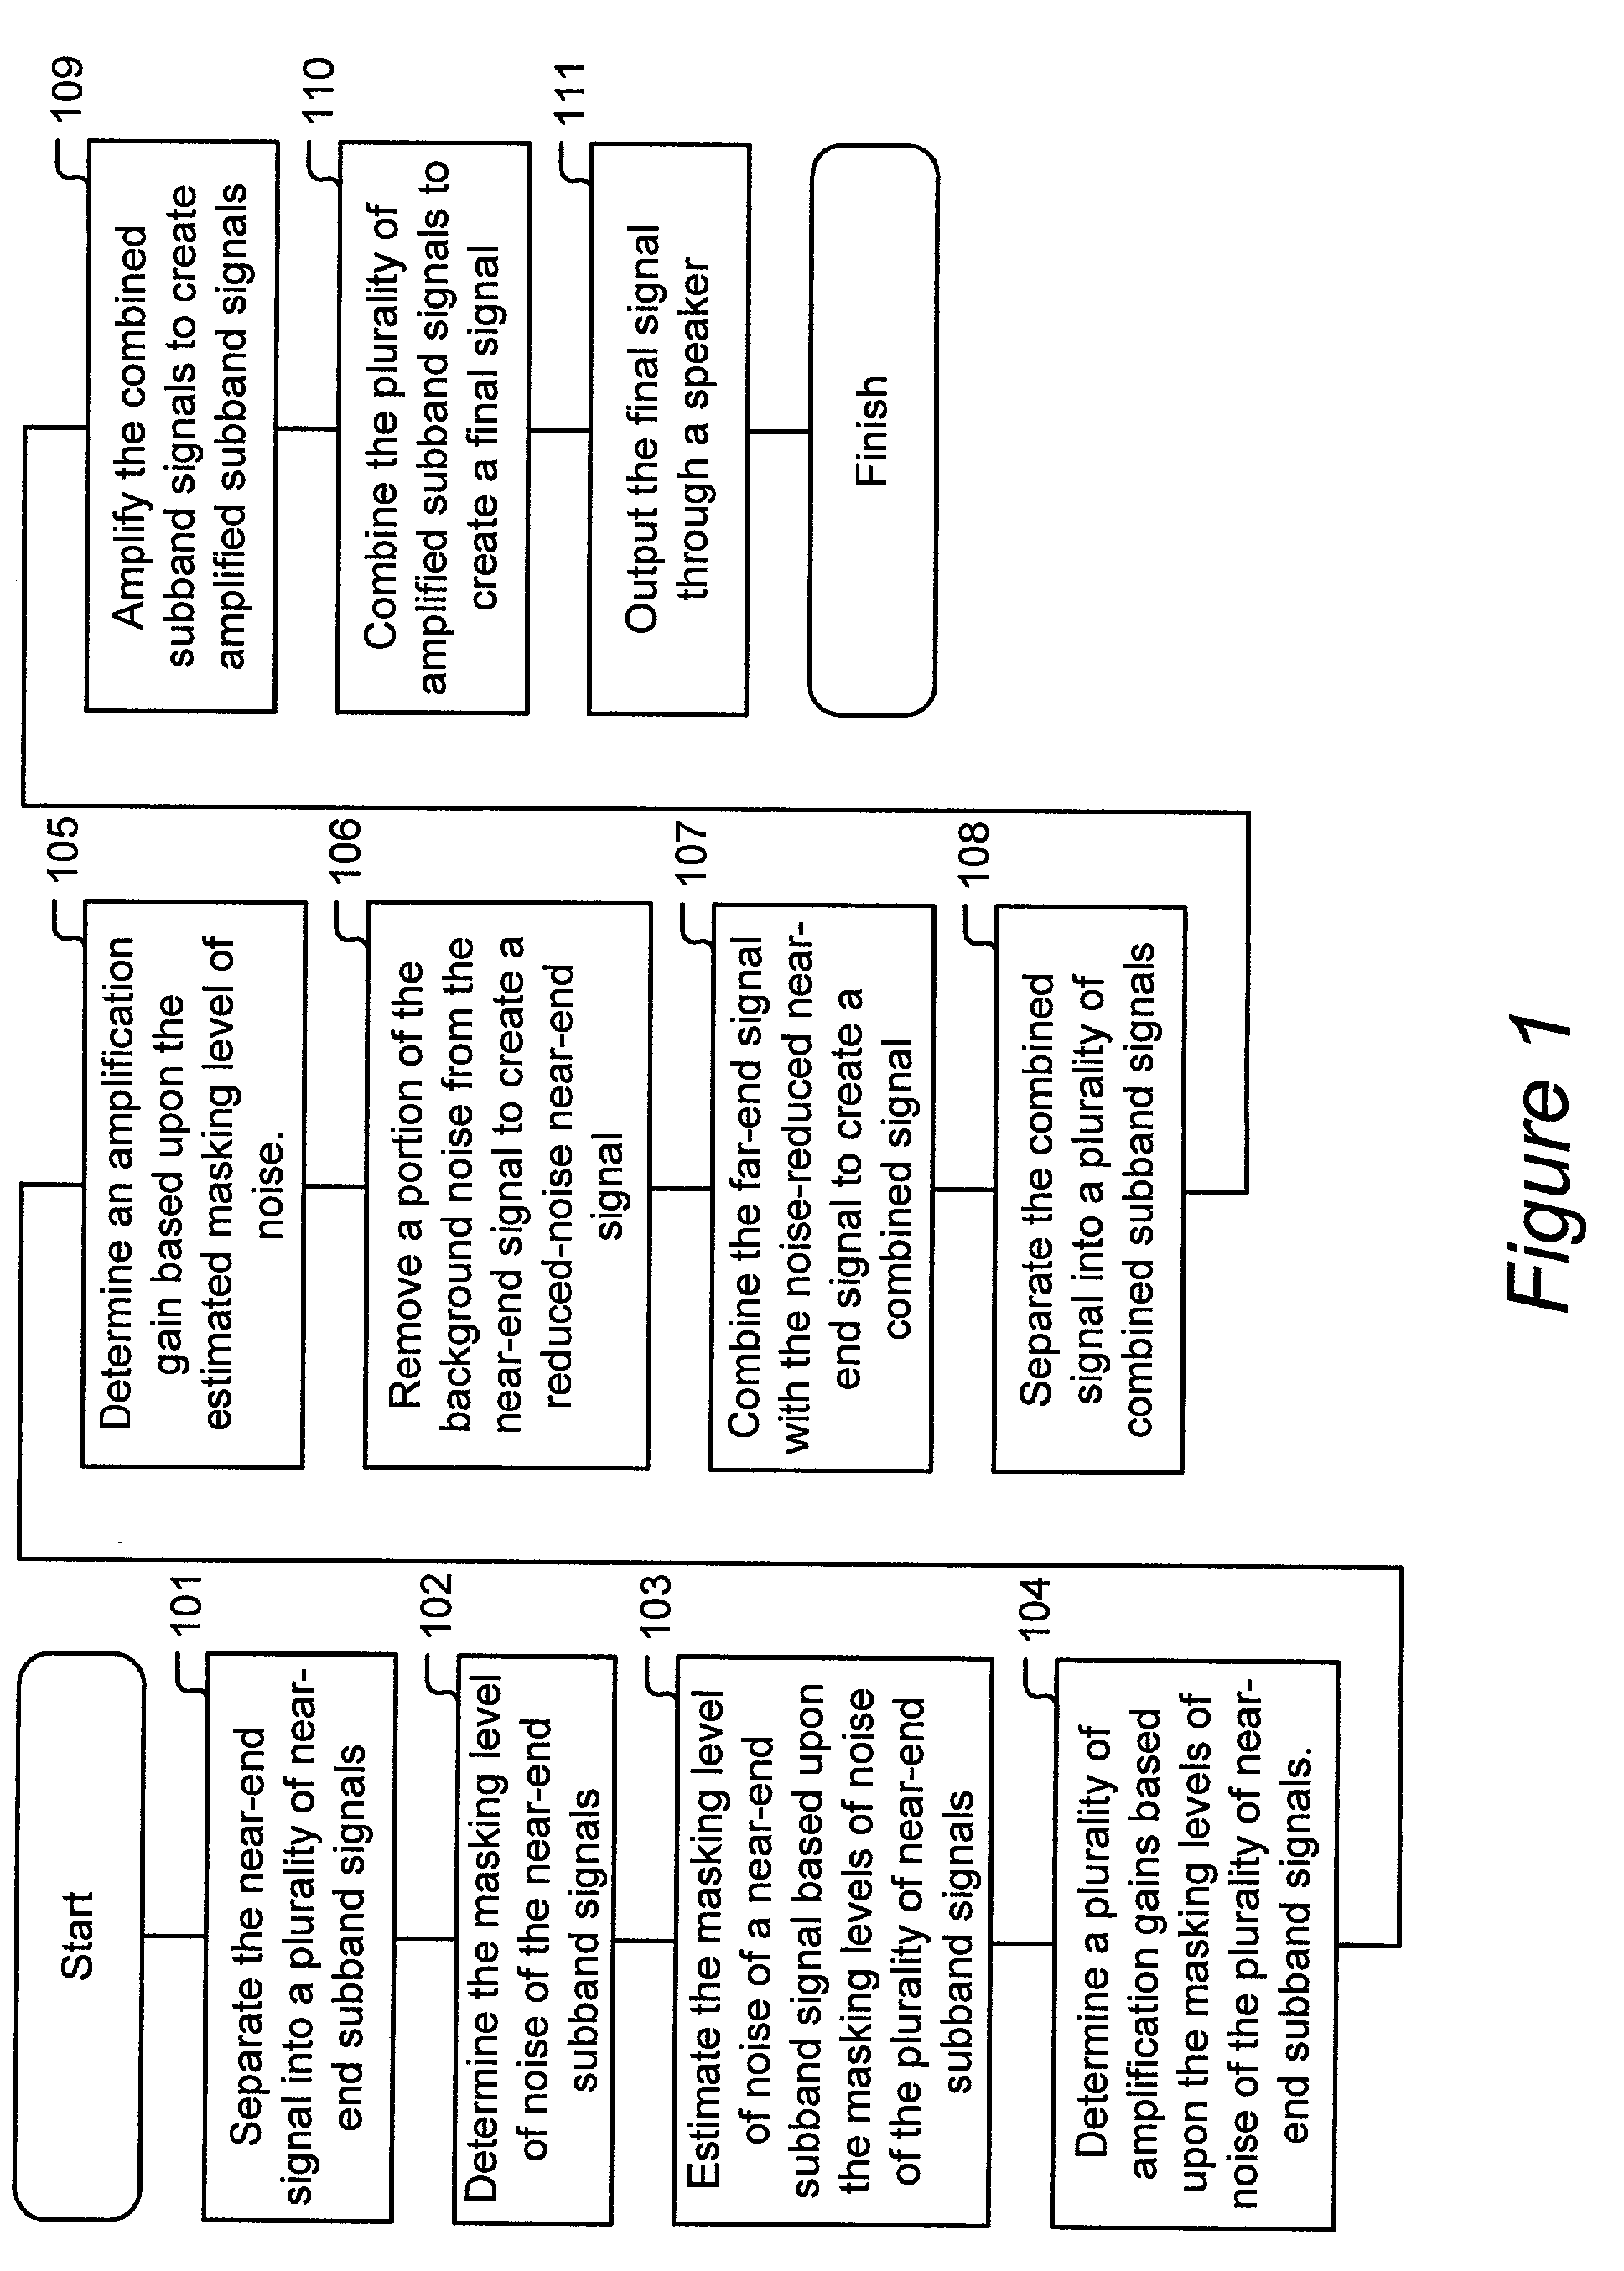 Method for generating a final signal from a near-end signal and a far-end signal